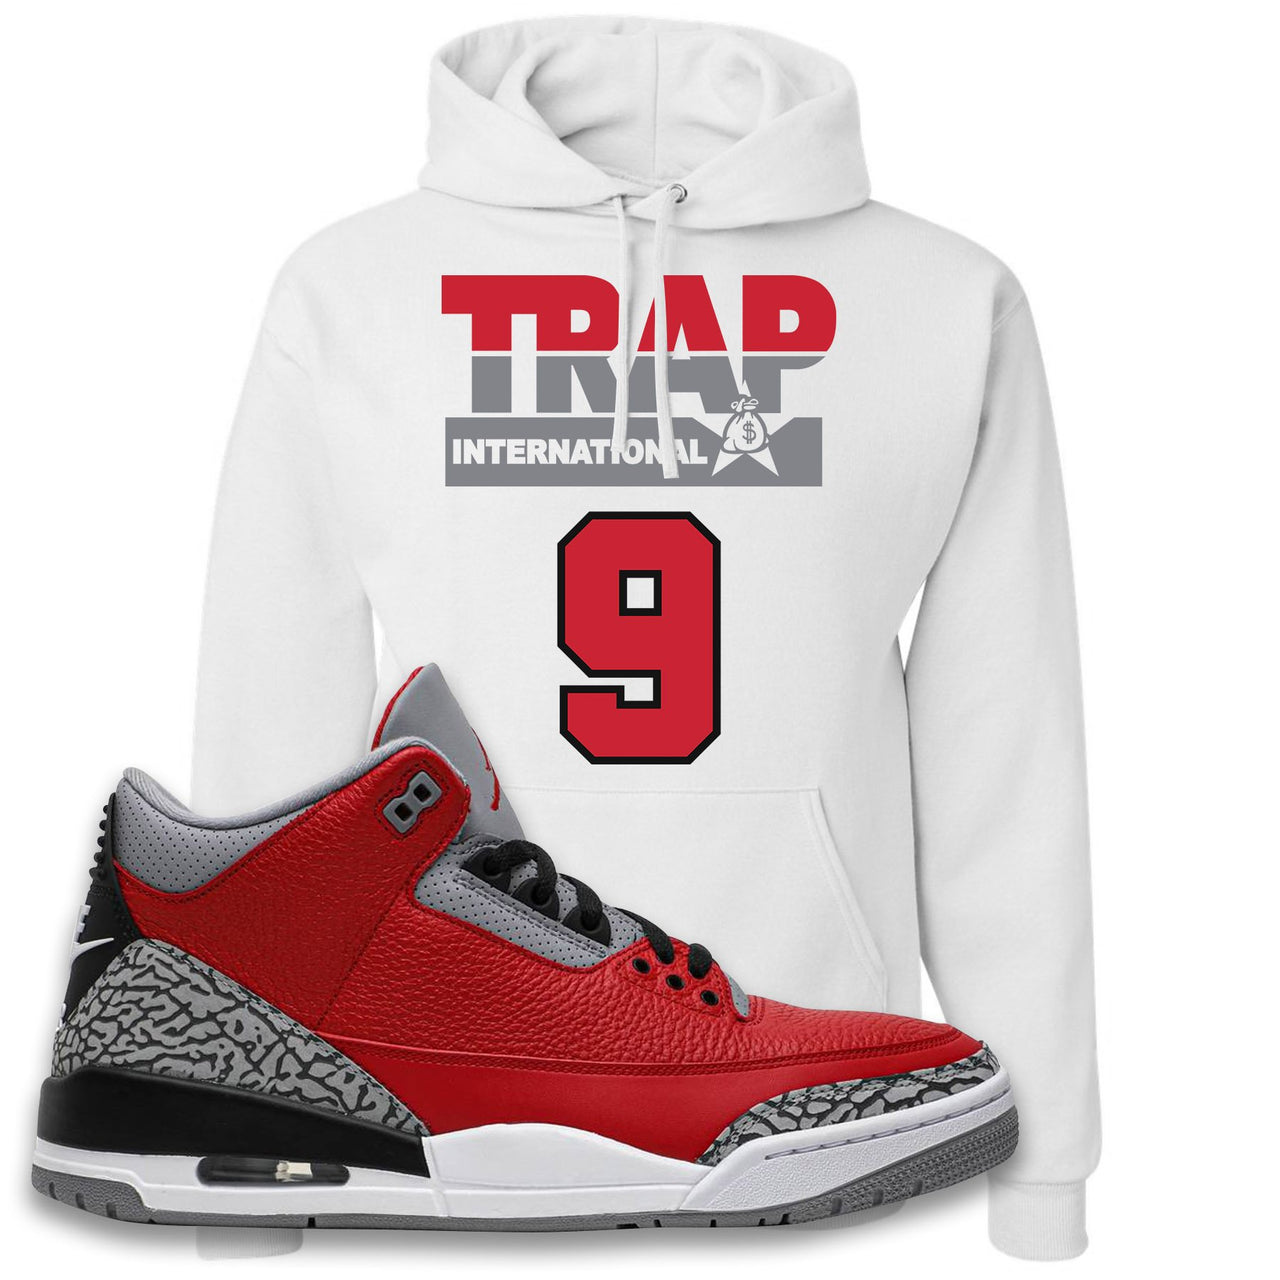 Jordan 3 Red Cement Chicago All-Star Sneaker White Pullover Hoodie | Hoodie to match Jordan 3 All Star Red Cement Shoes | Trap International